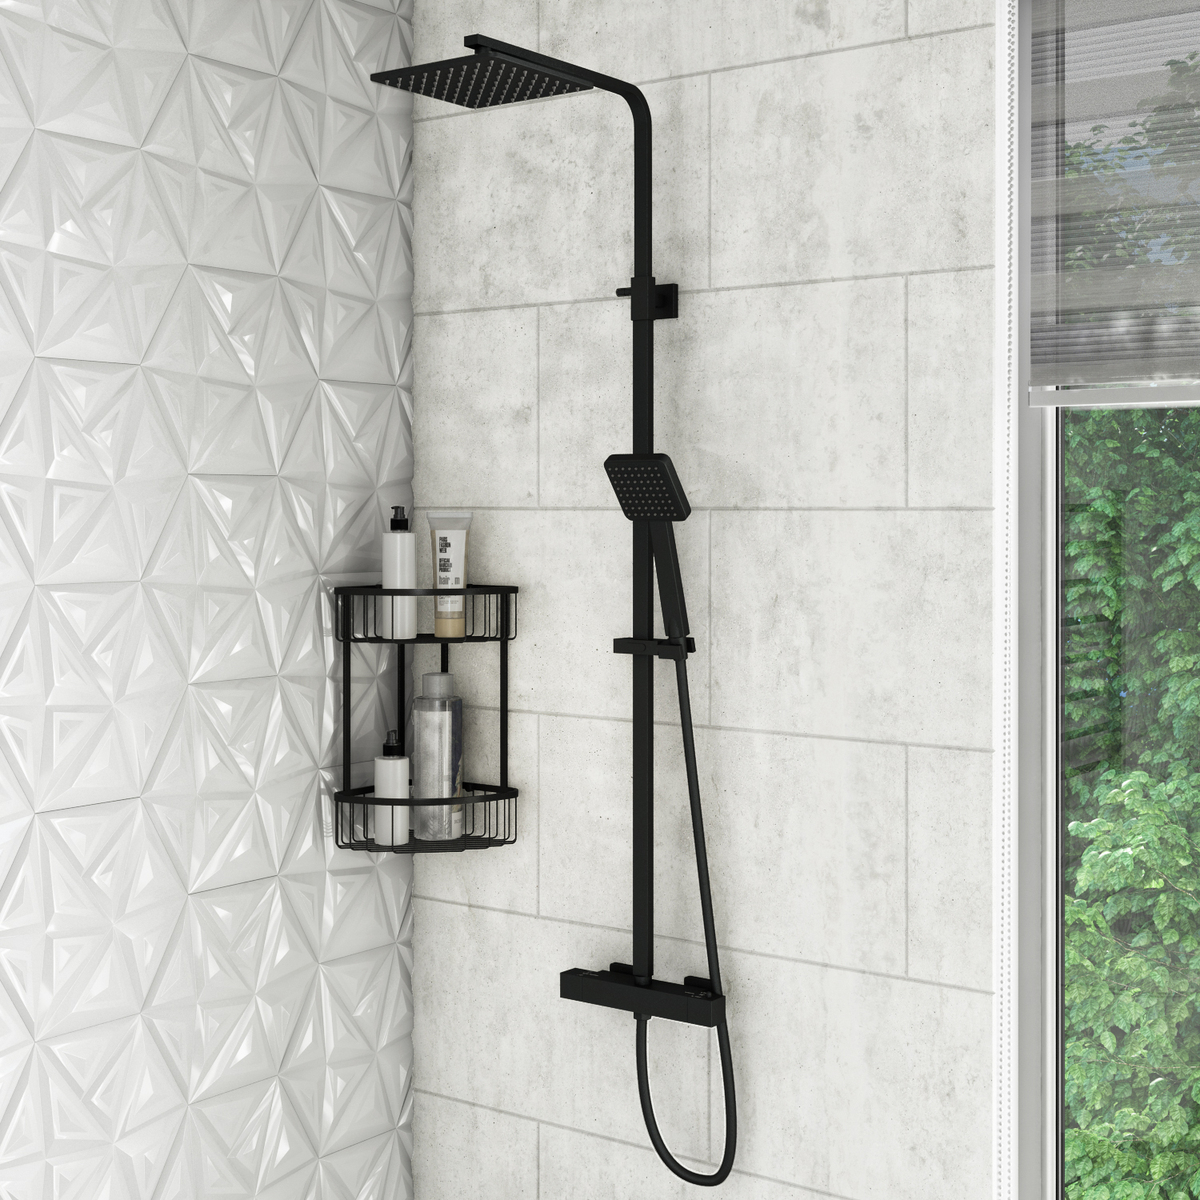 Modern bathroom styled with black thermostatic Shower and black wall mounted corner caddy.